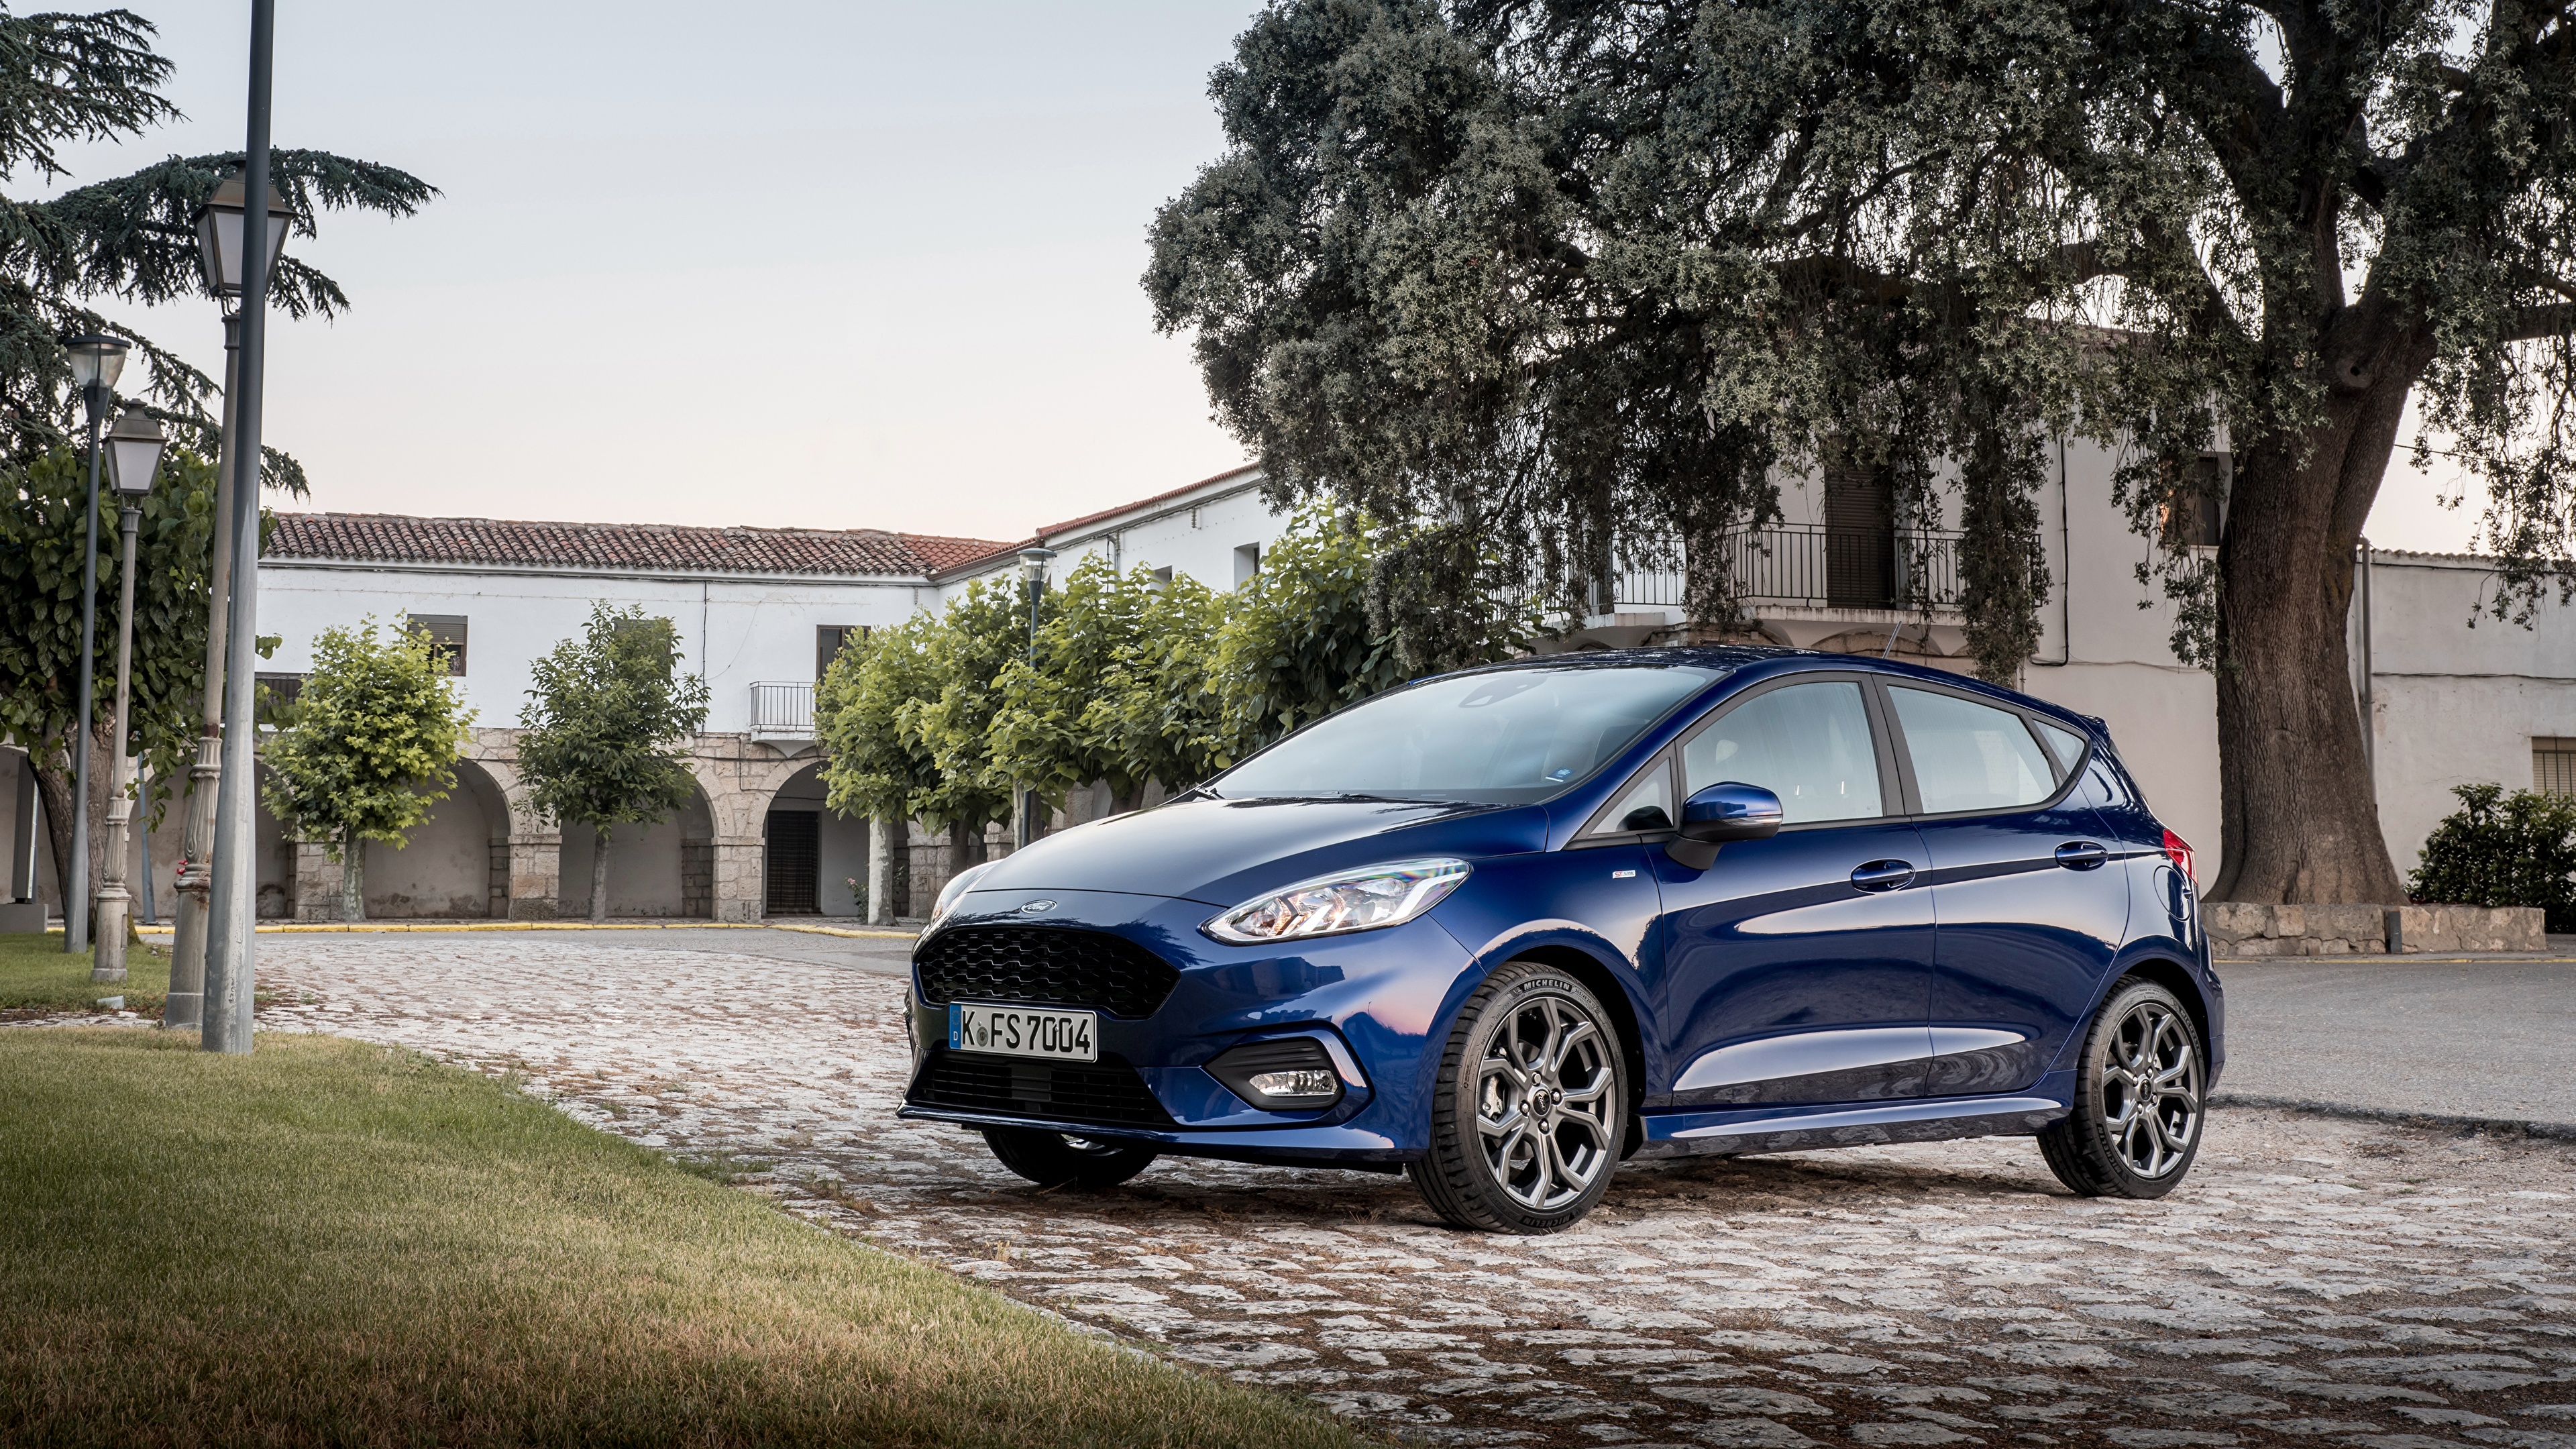 Ford Fiesta Active interior specifications